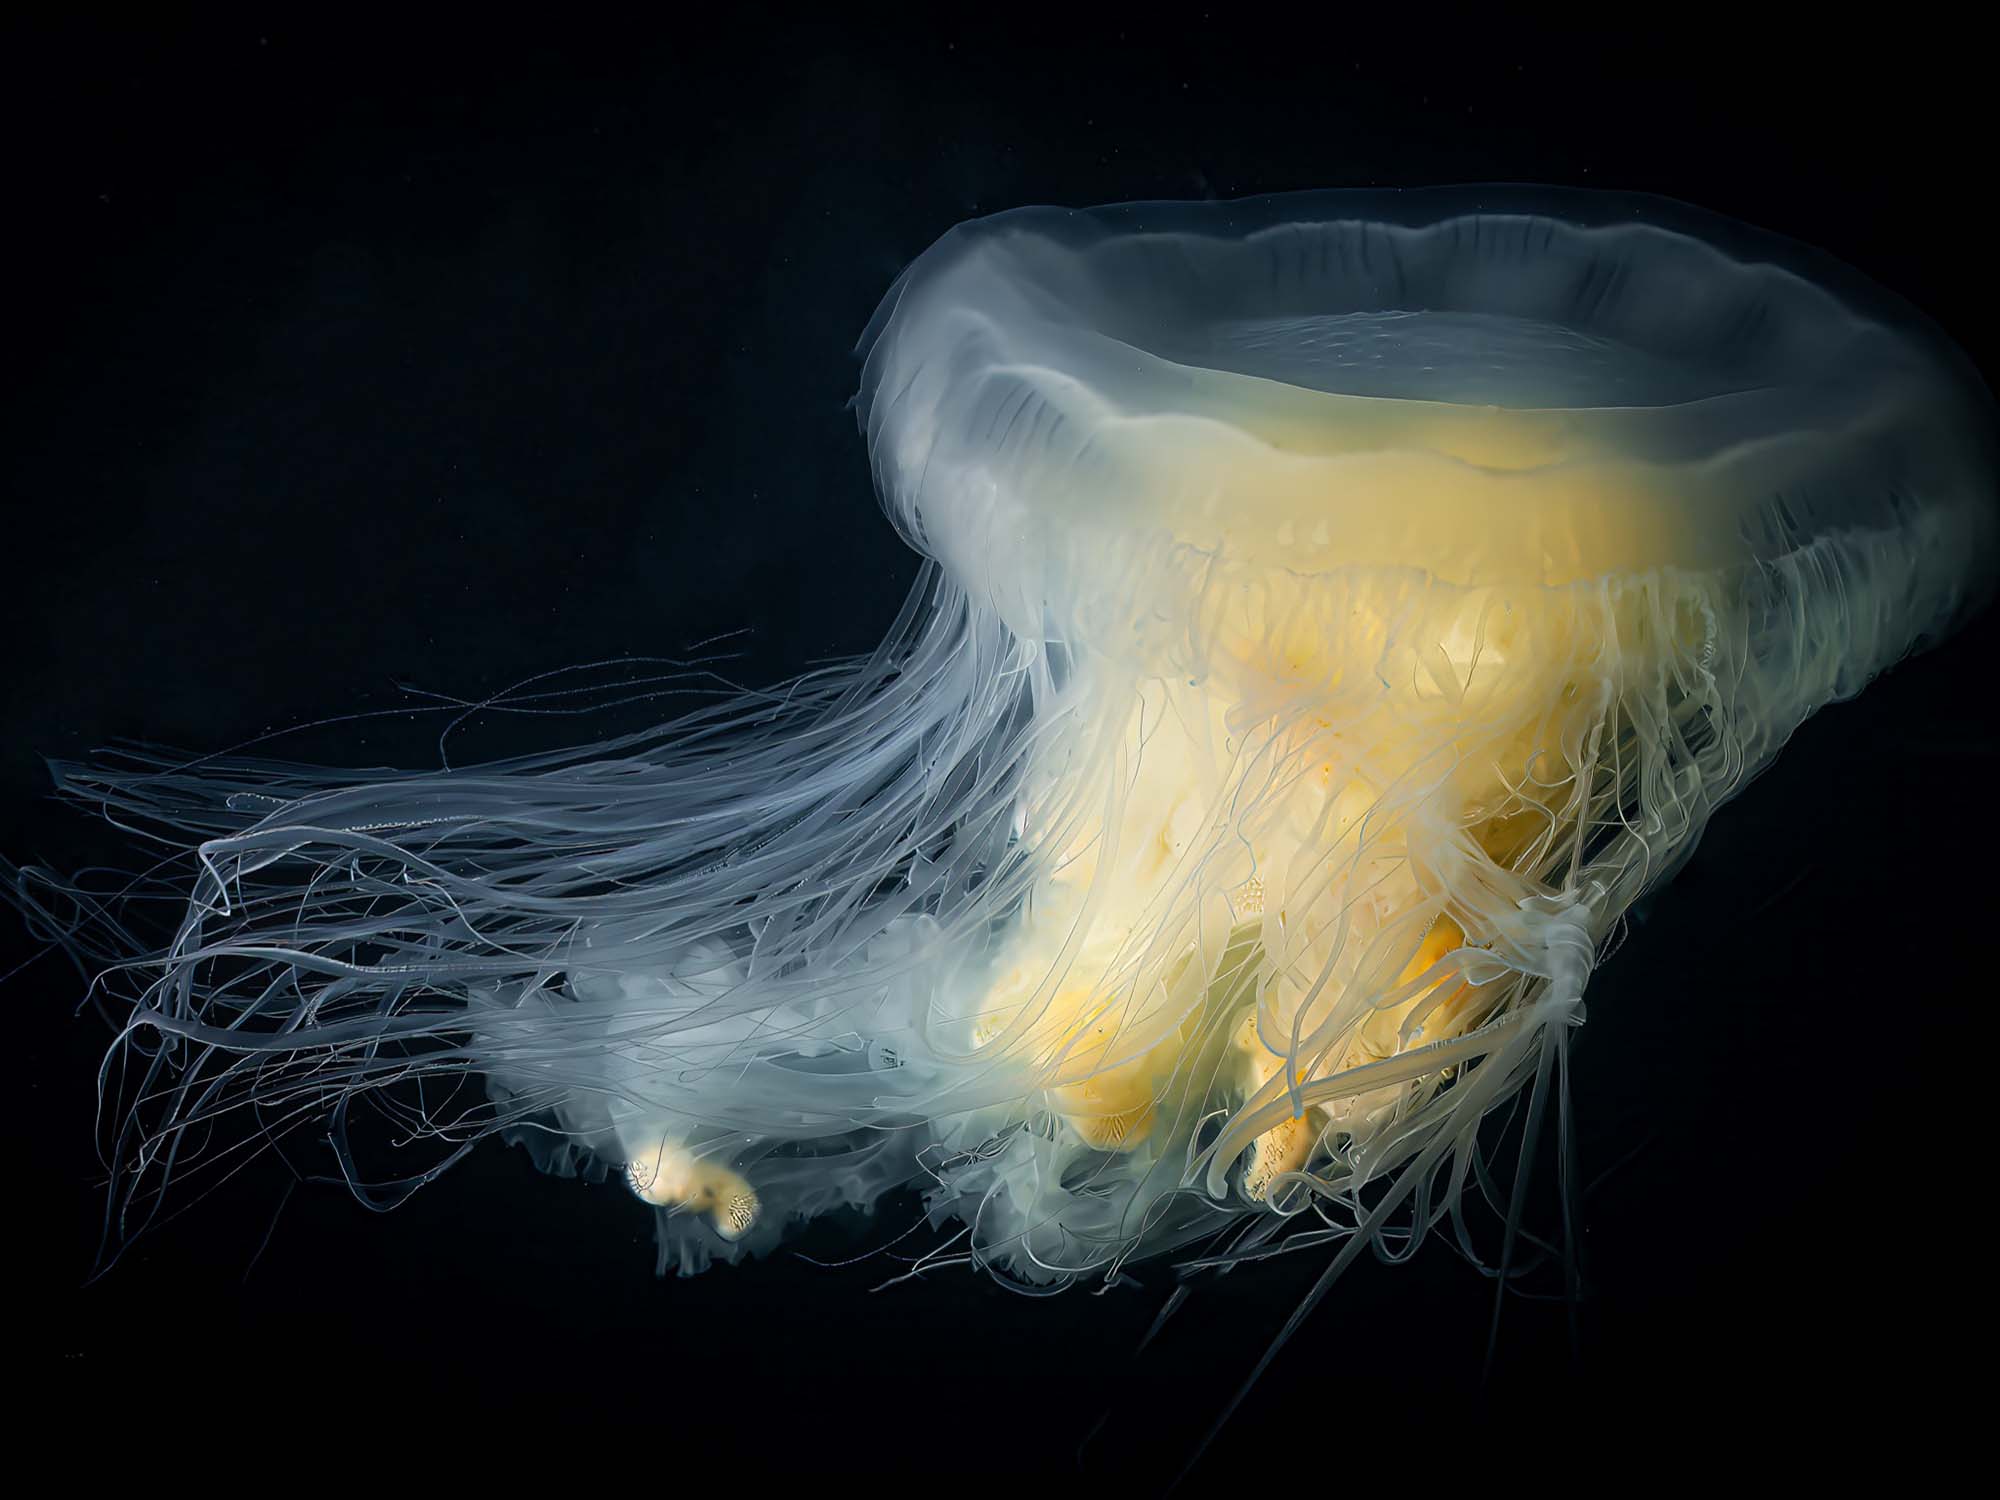 Photographing the Ethereal Egg-Yolk Jellyfish